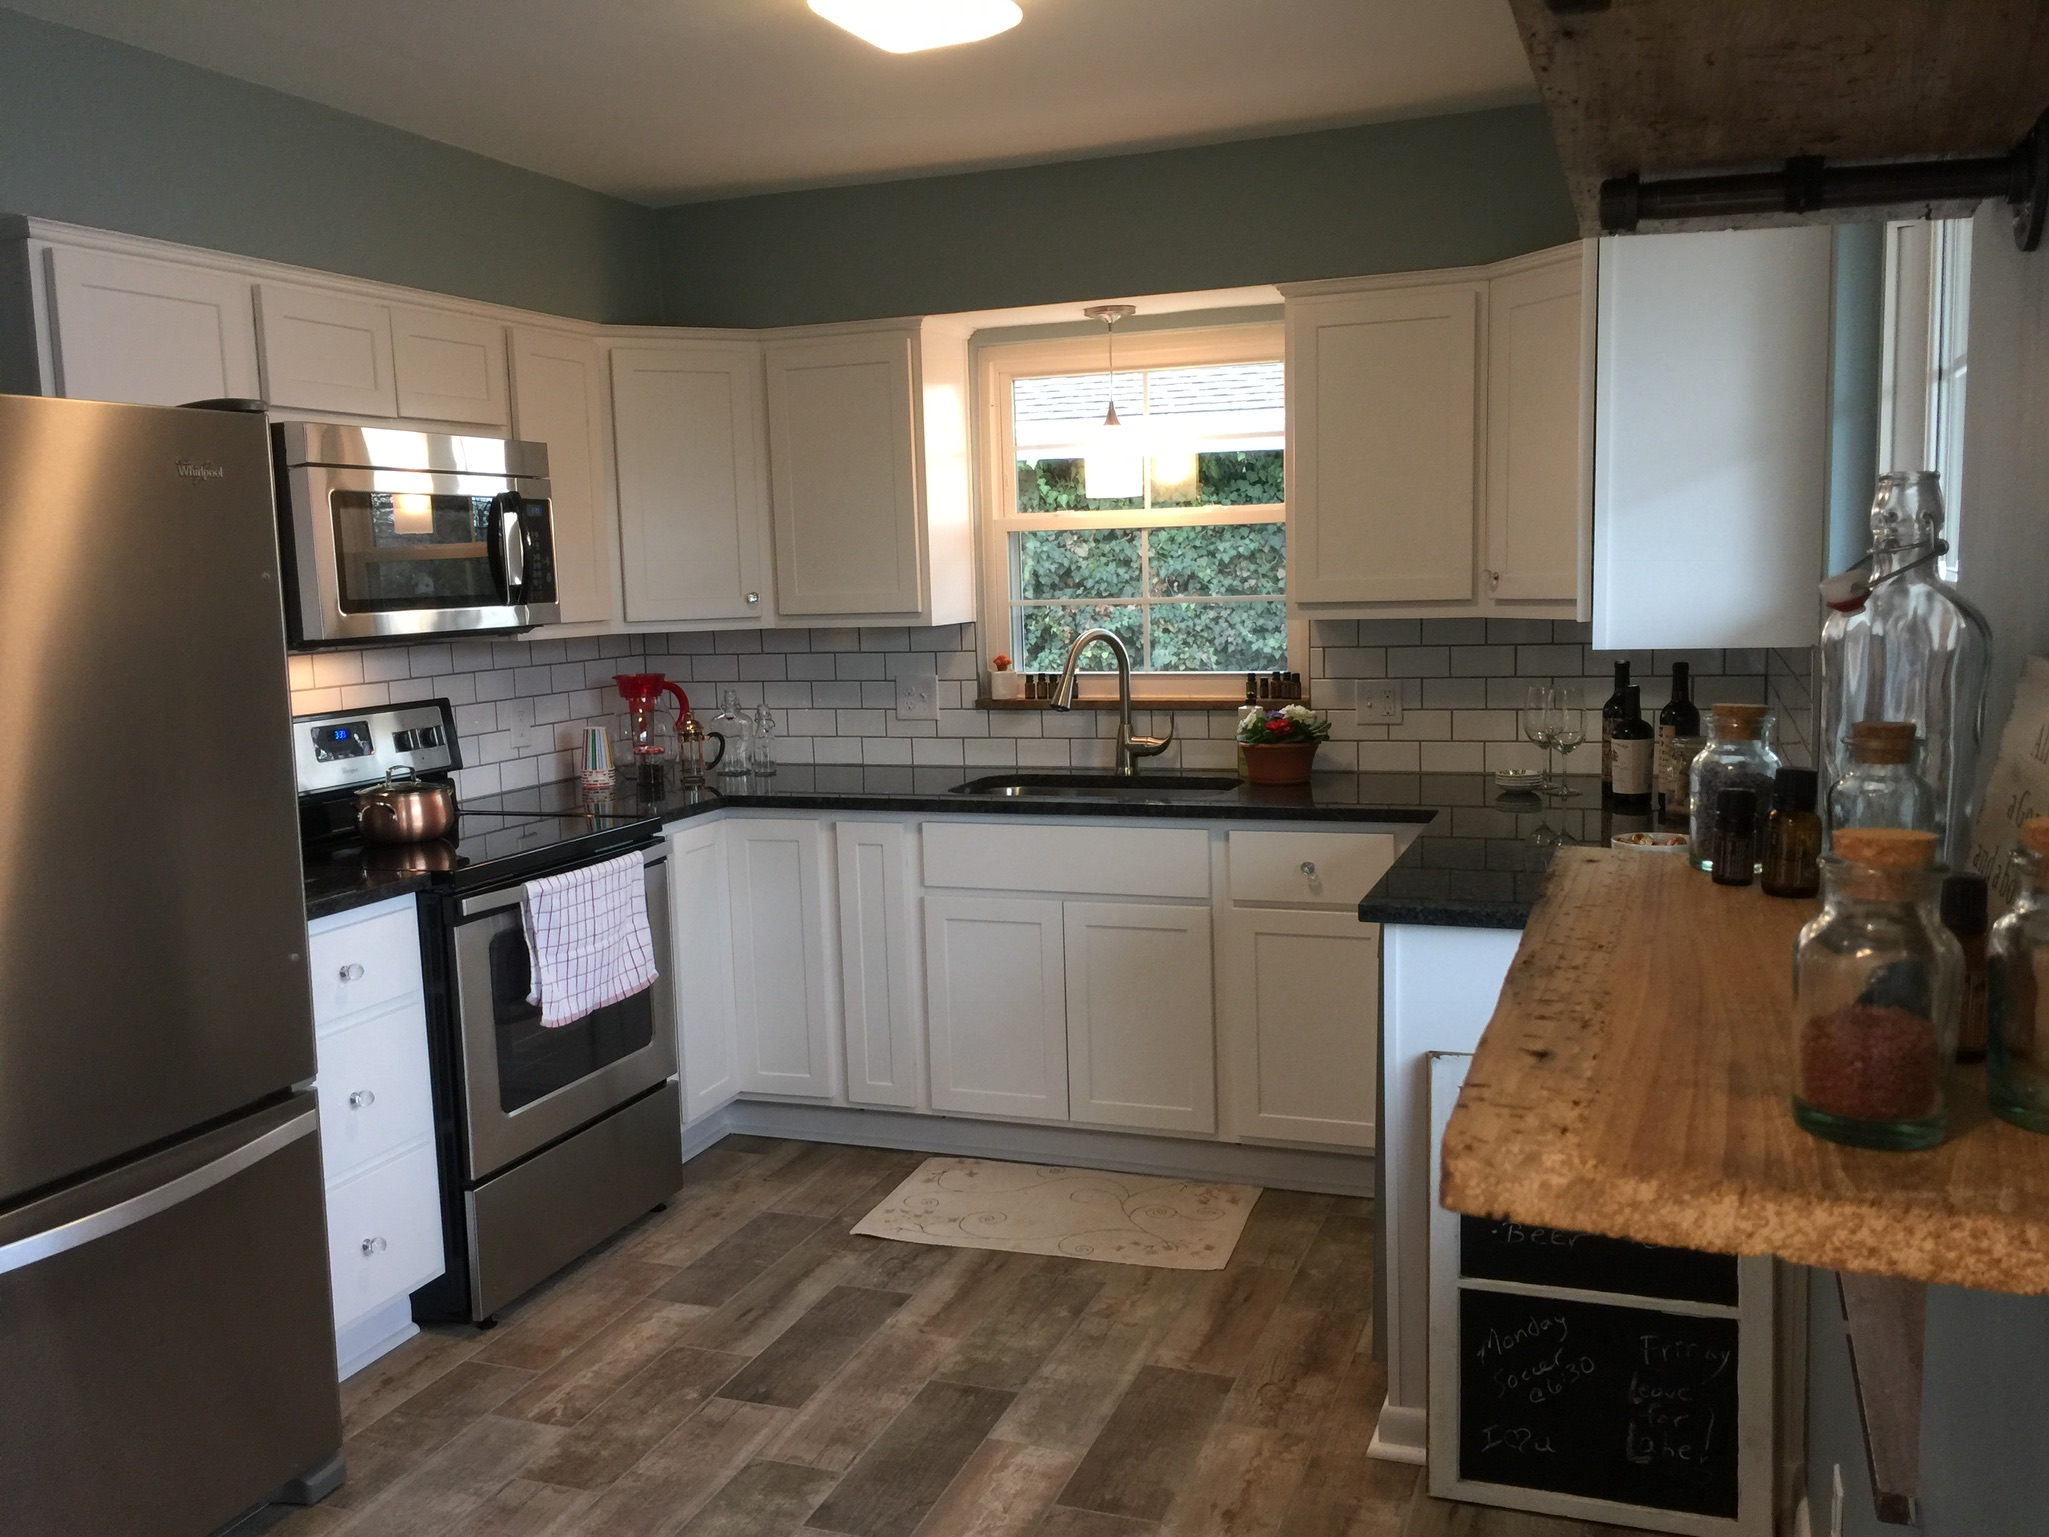 One of our recent projects...it's one we did together.  This is a complete kitchen remodel. Tile floor, subway tile backsplash, granite countertops, reclaimed wood shelves! 